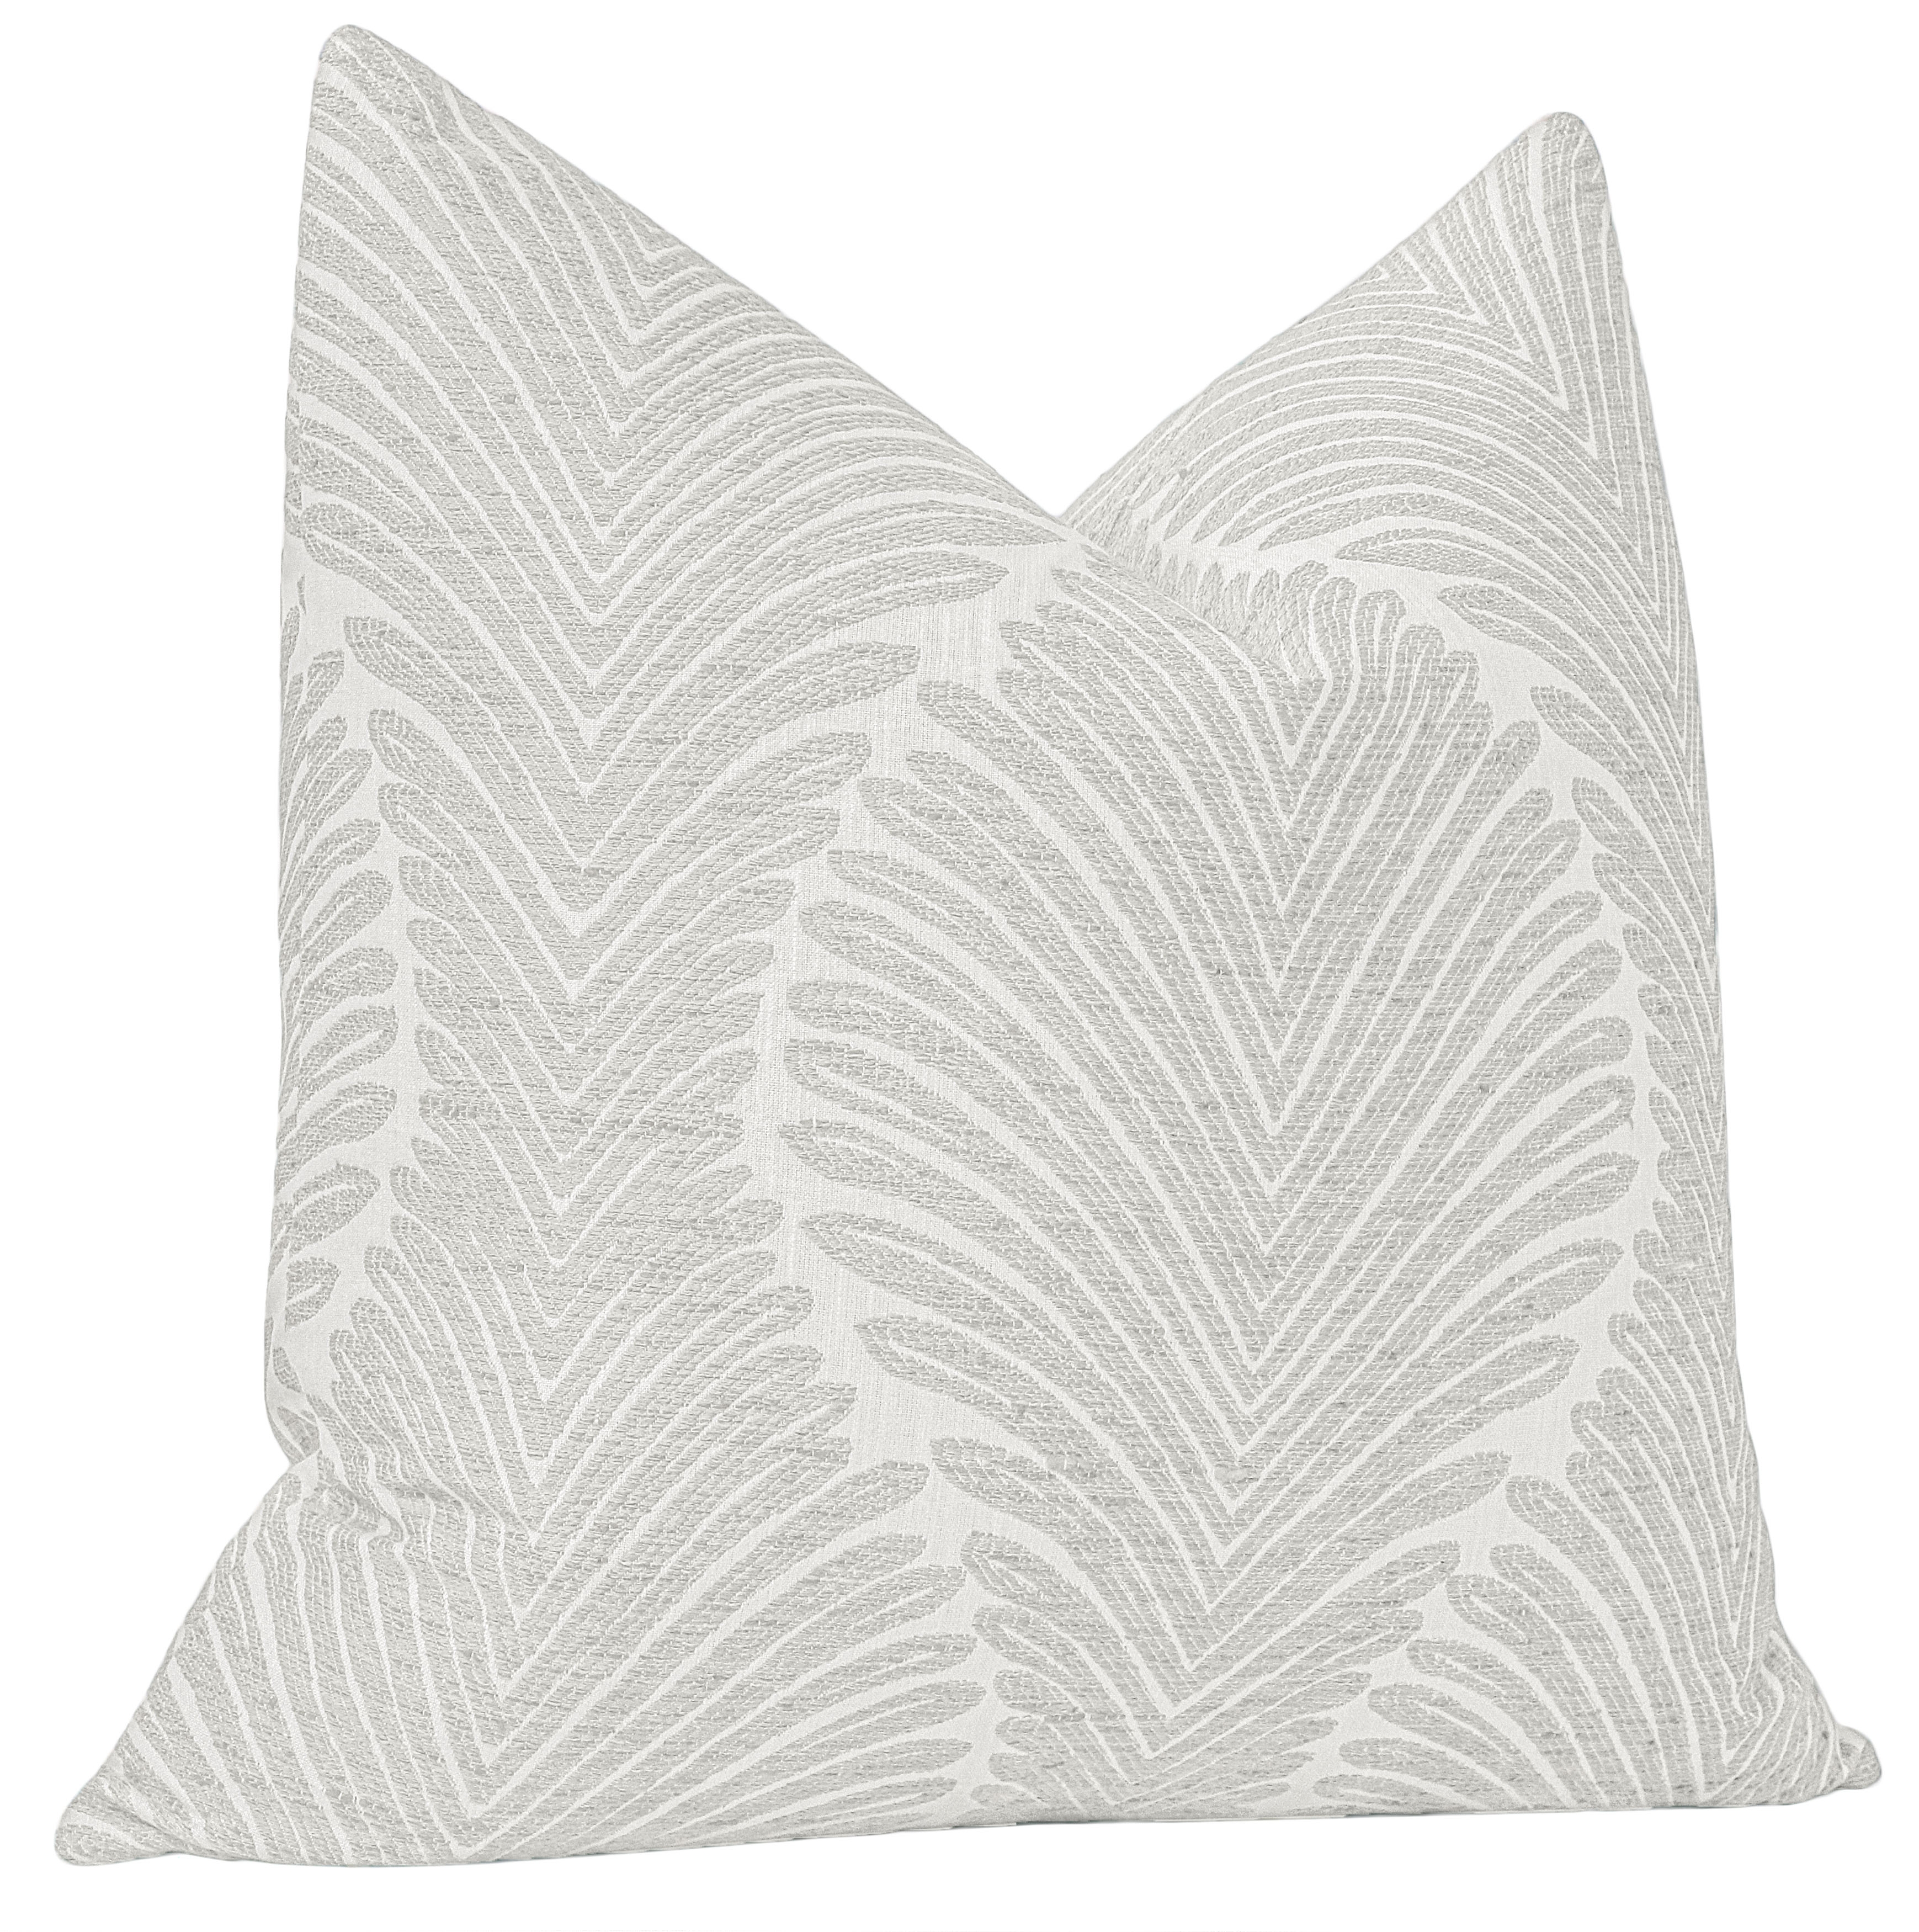 Musgrove Chenille Pillow Cover, Dove Grey, 18" x 18" - Image 2